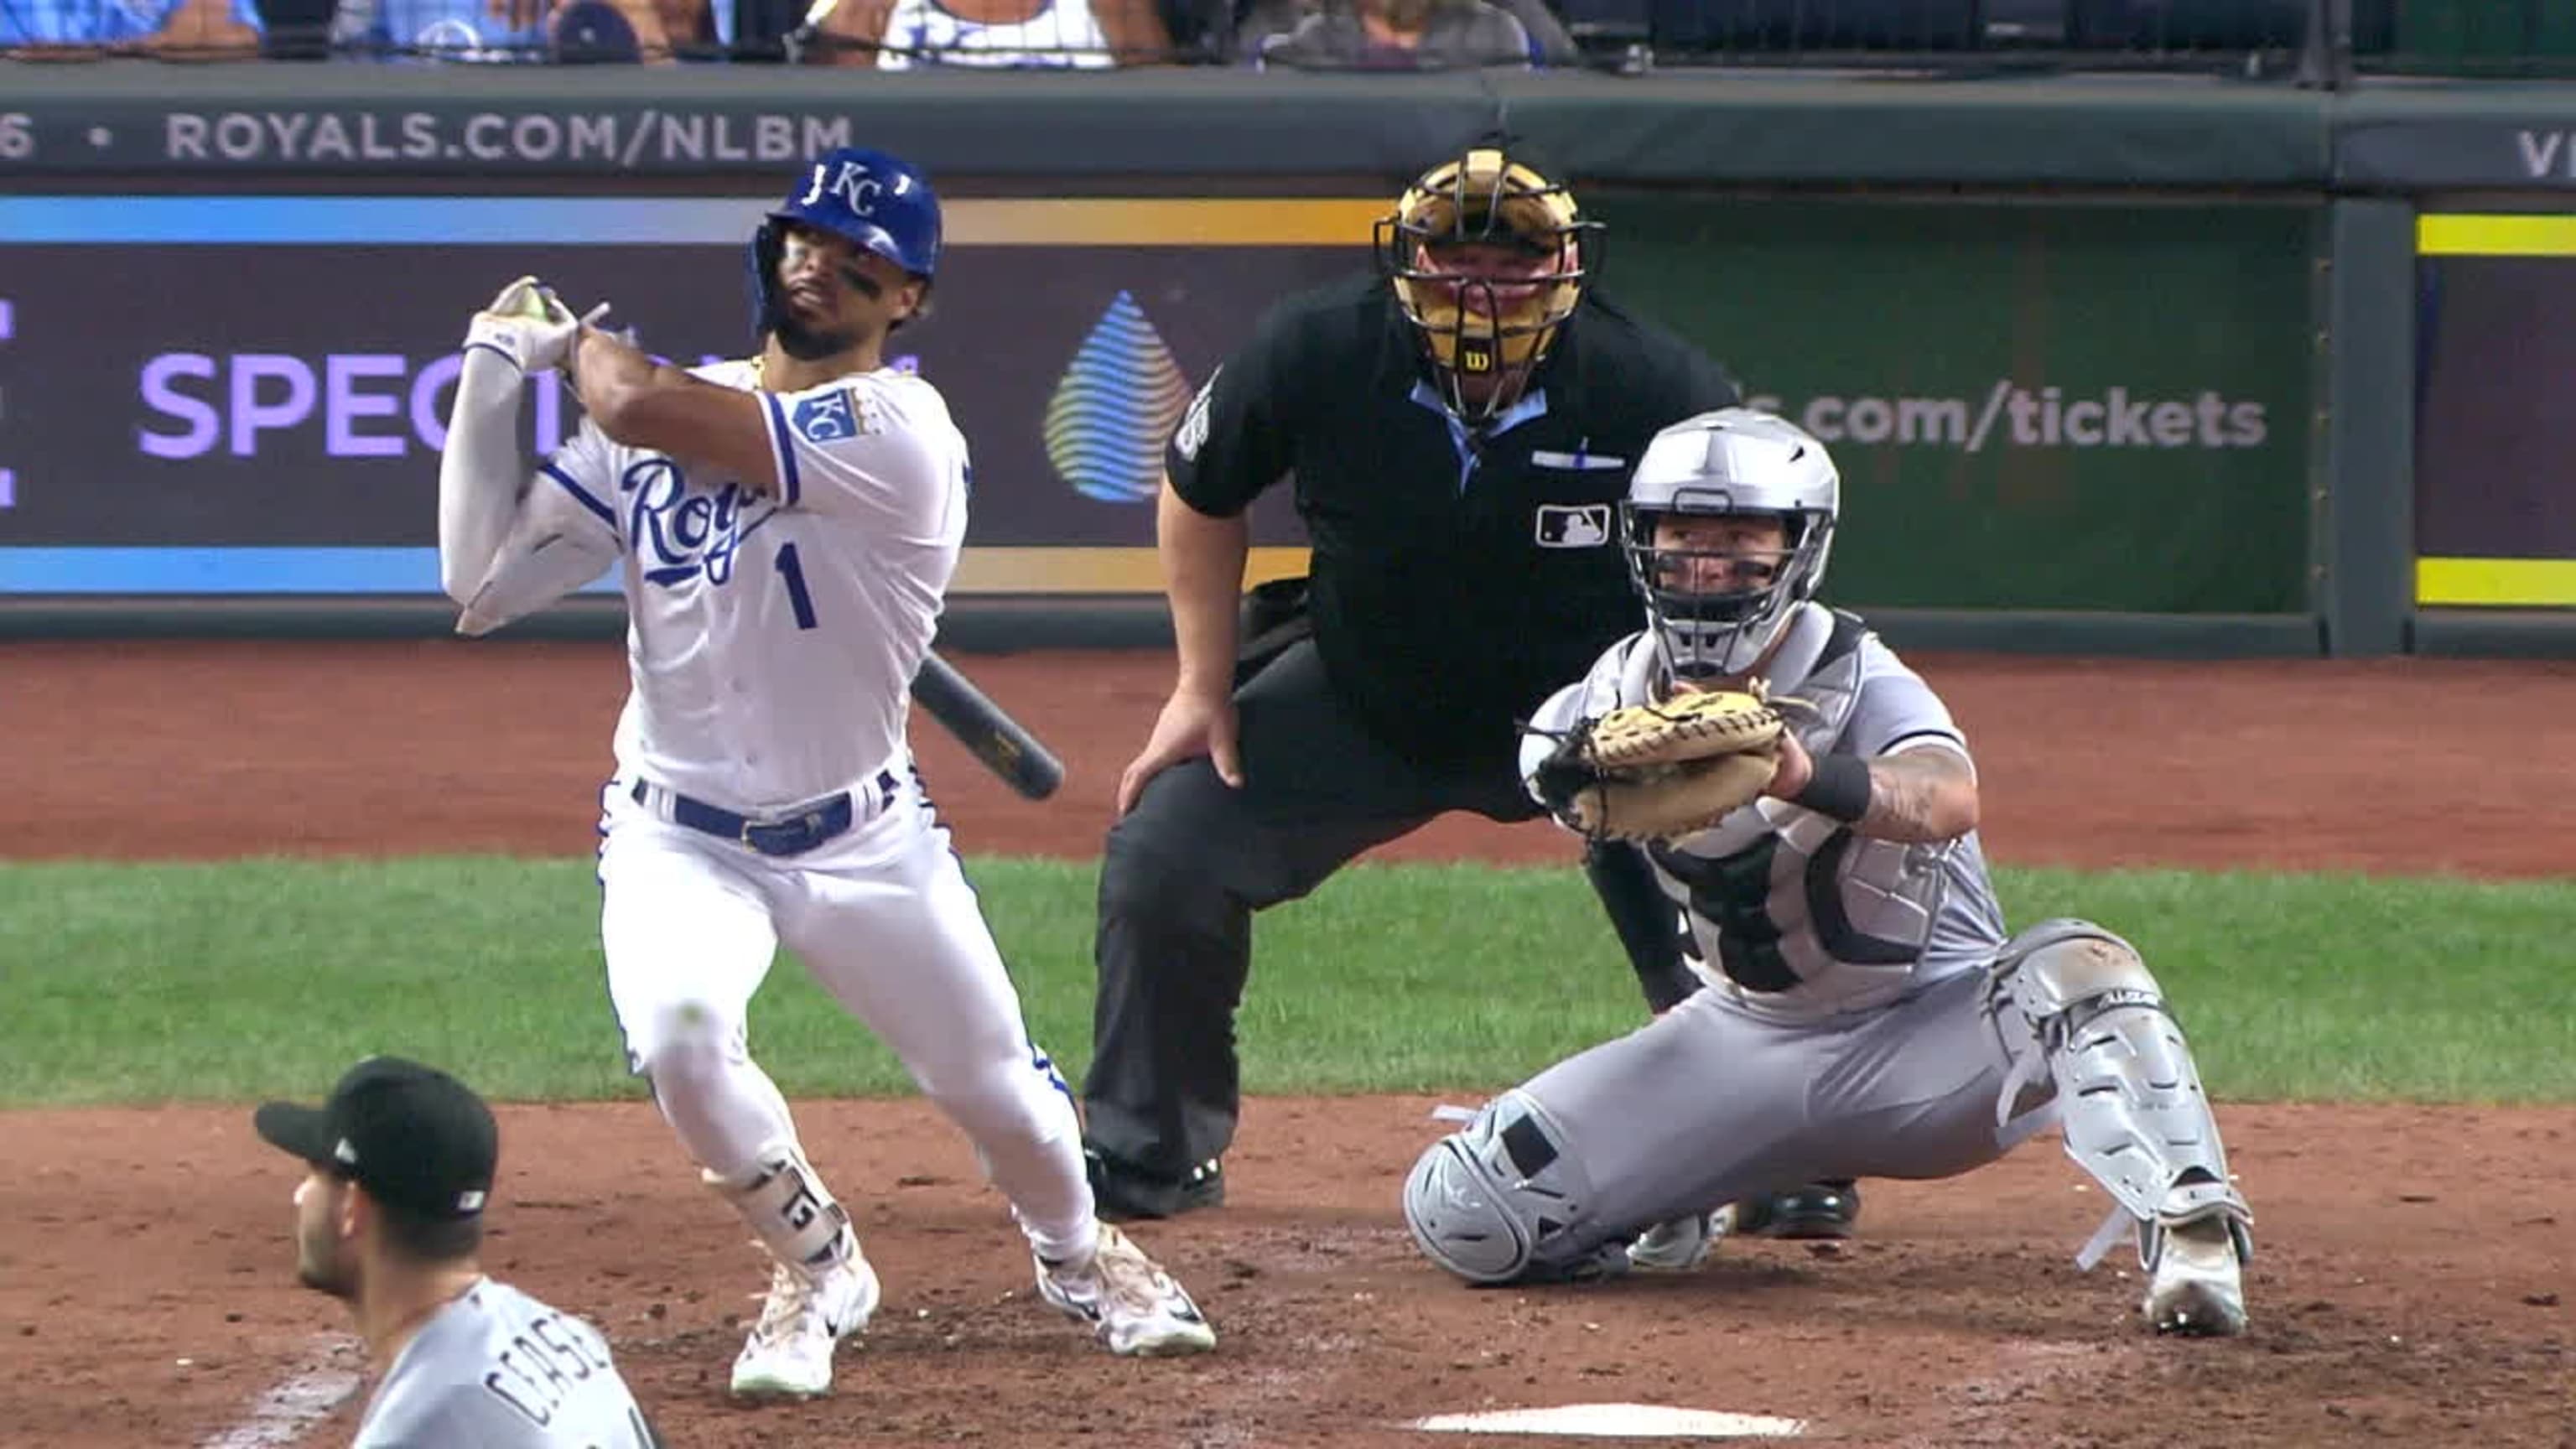 B/R Walk-Off on X: The Royals got some new threads 😮